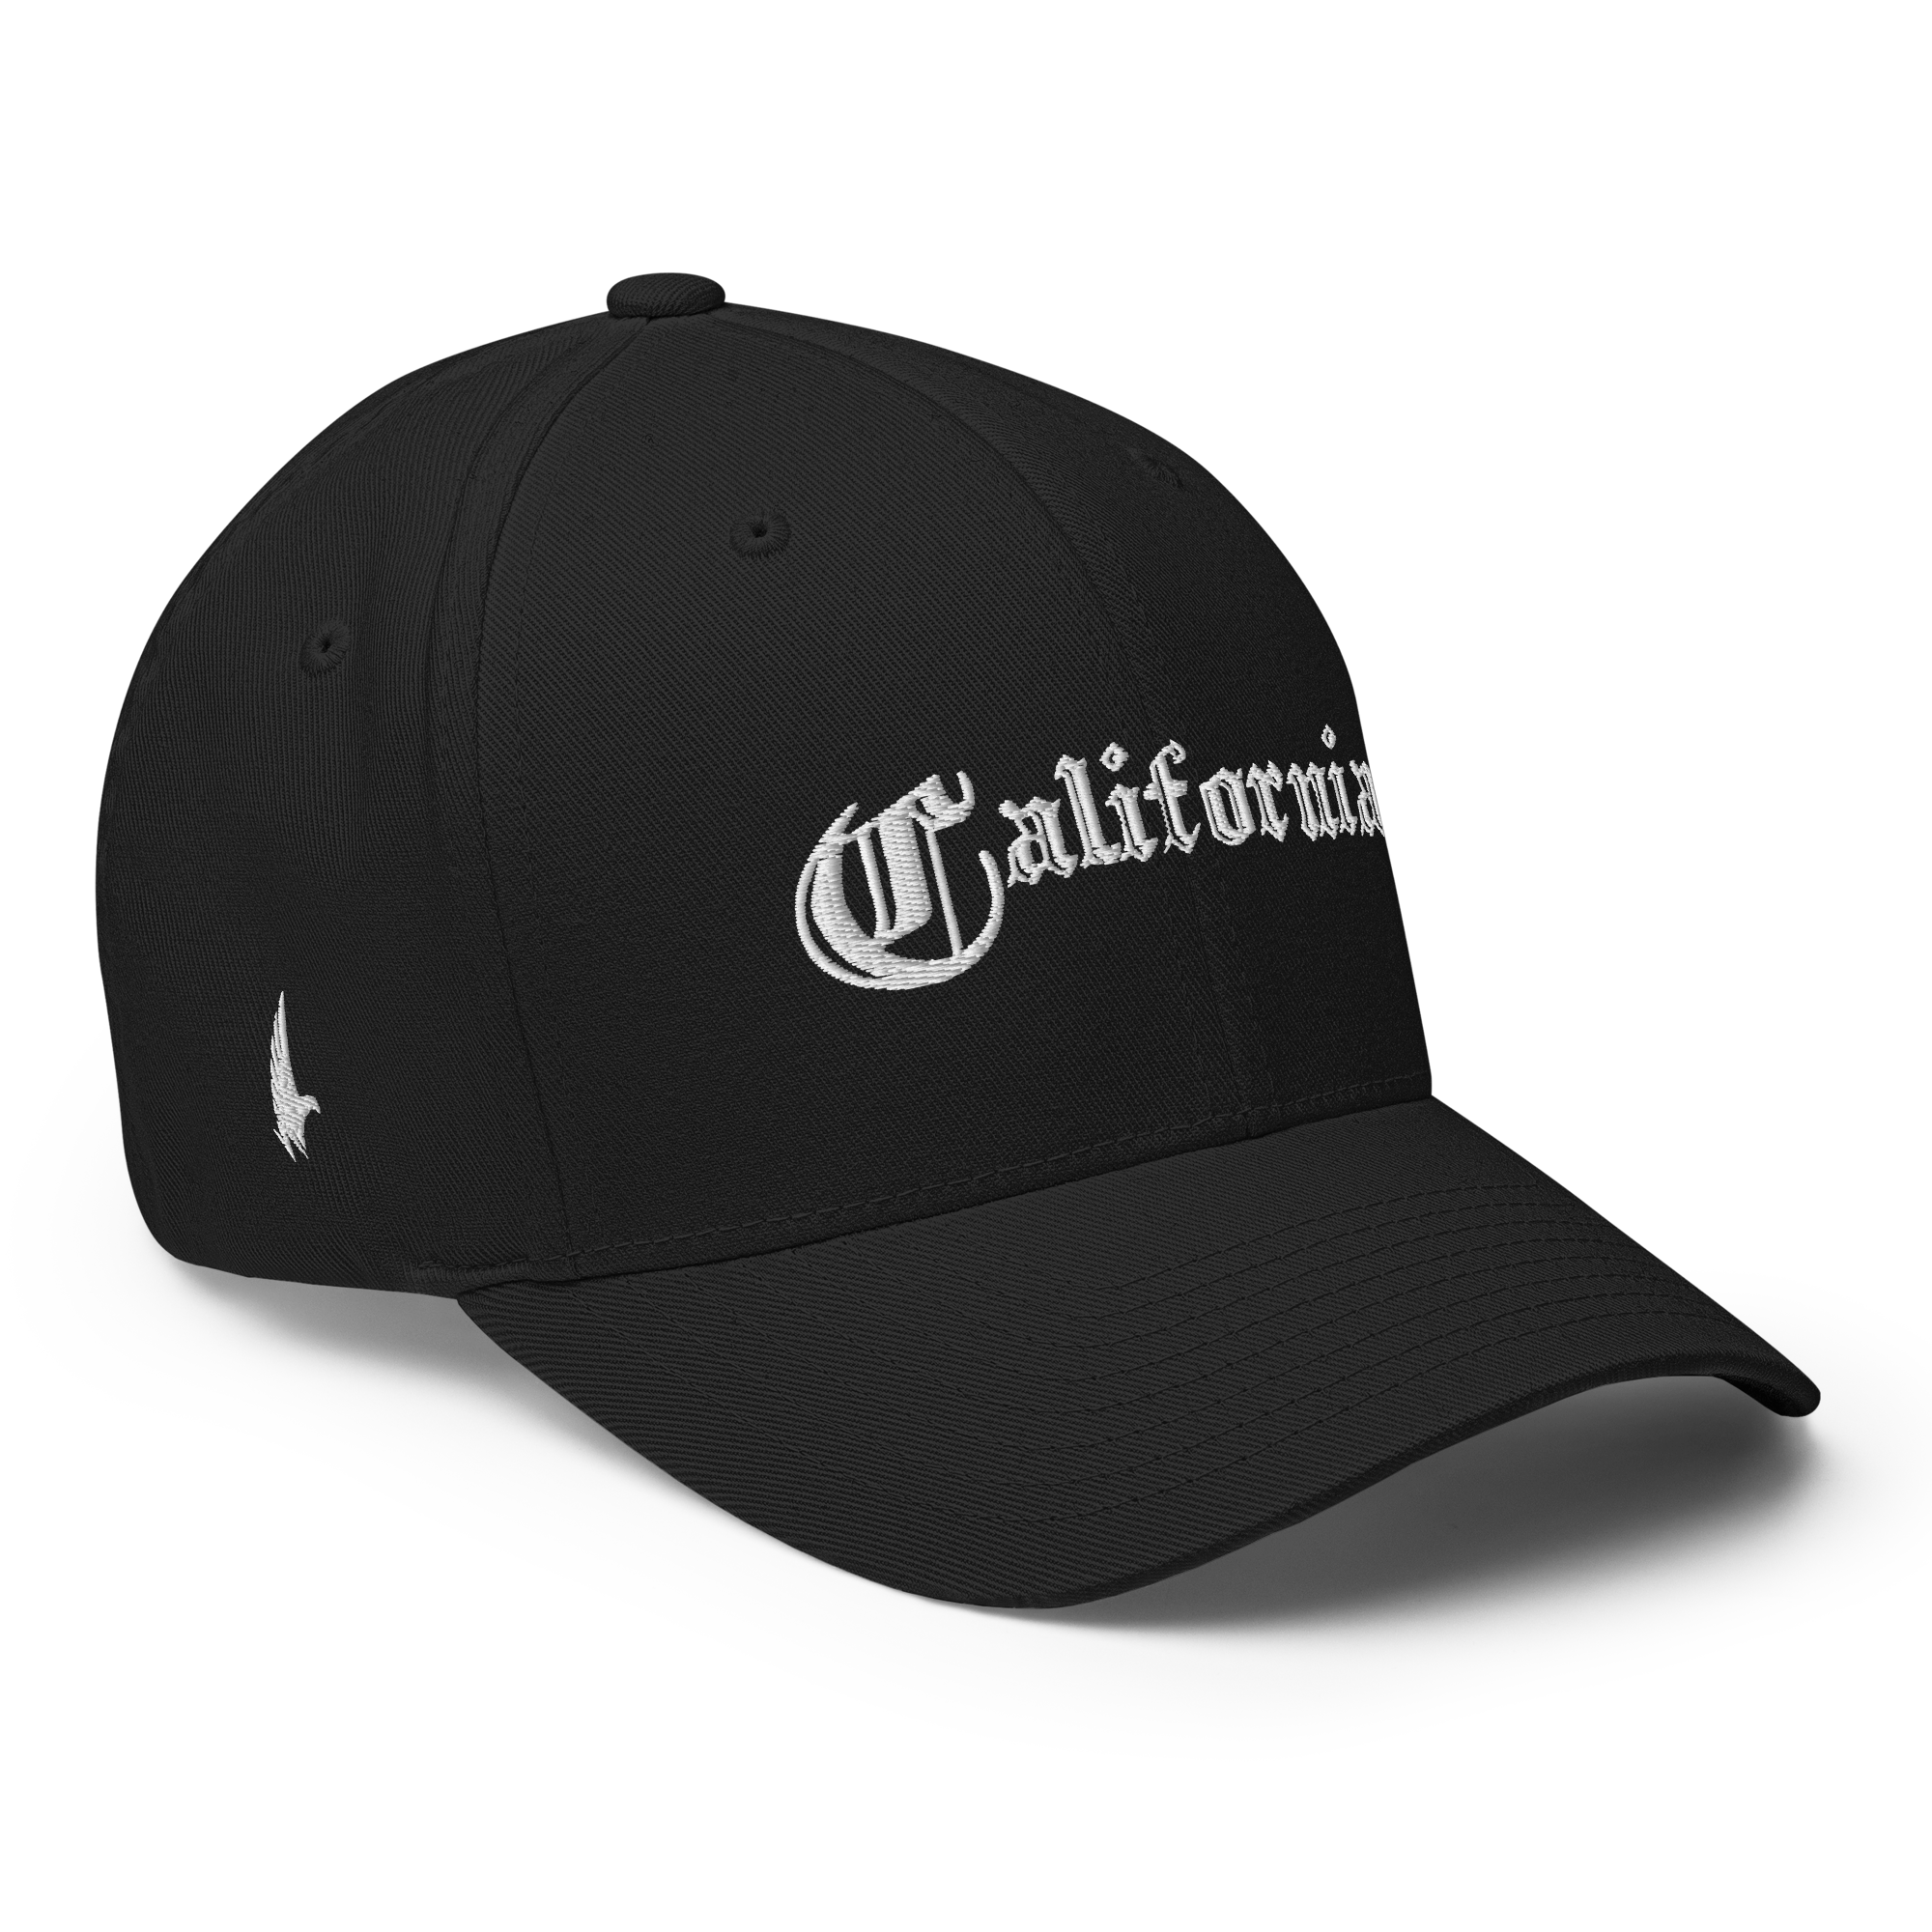 California Fitted Hat - Black Fitted - Loyalty Vibes